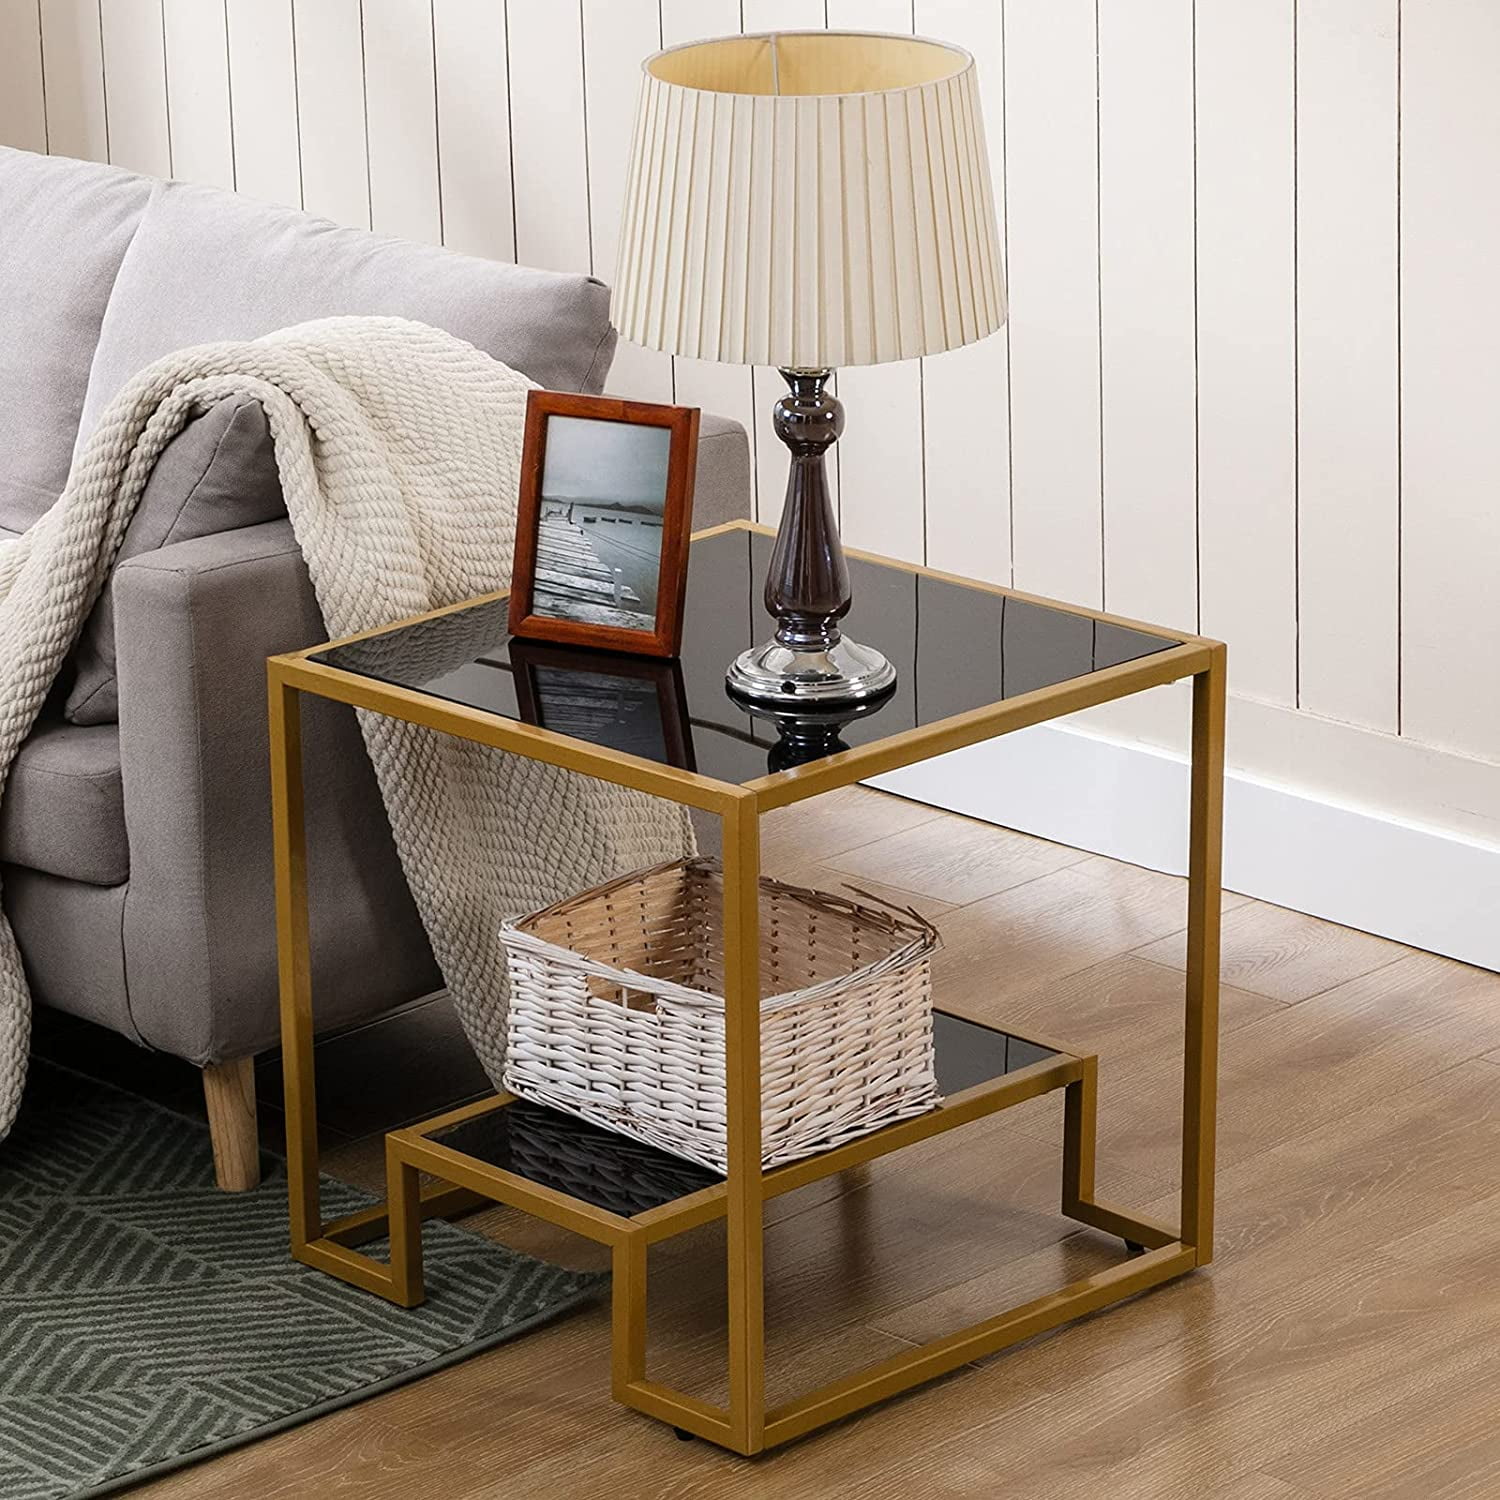 Round Terrarium Display End Table with Reinforced Glass in Gold Iron- 20 Diameter, 26.5 Height